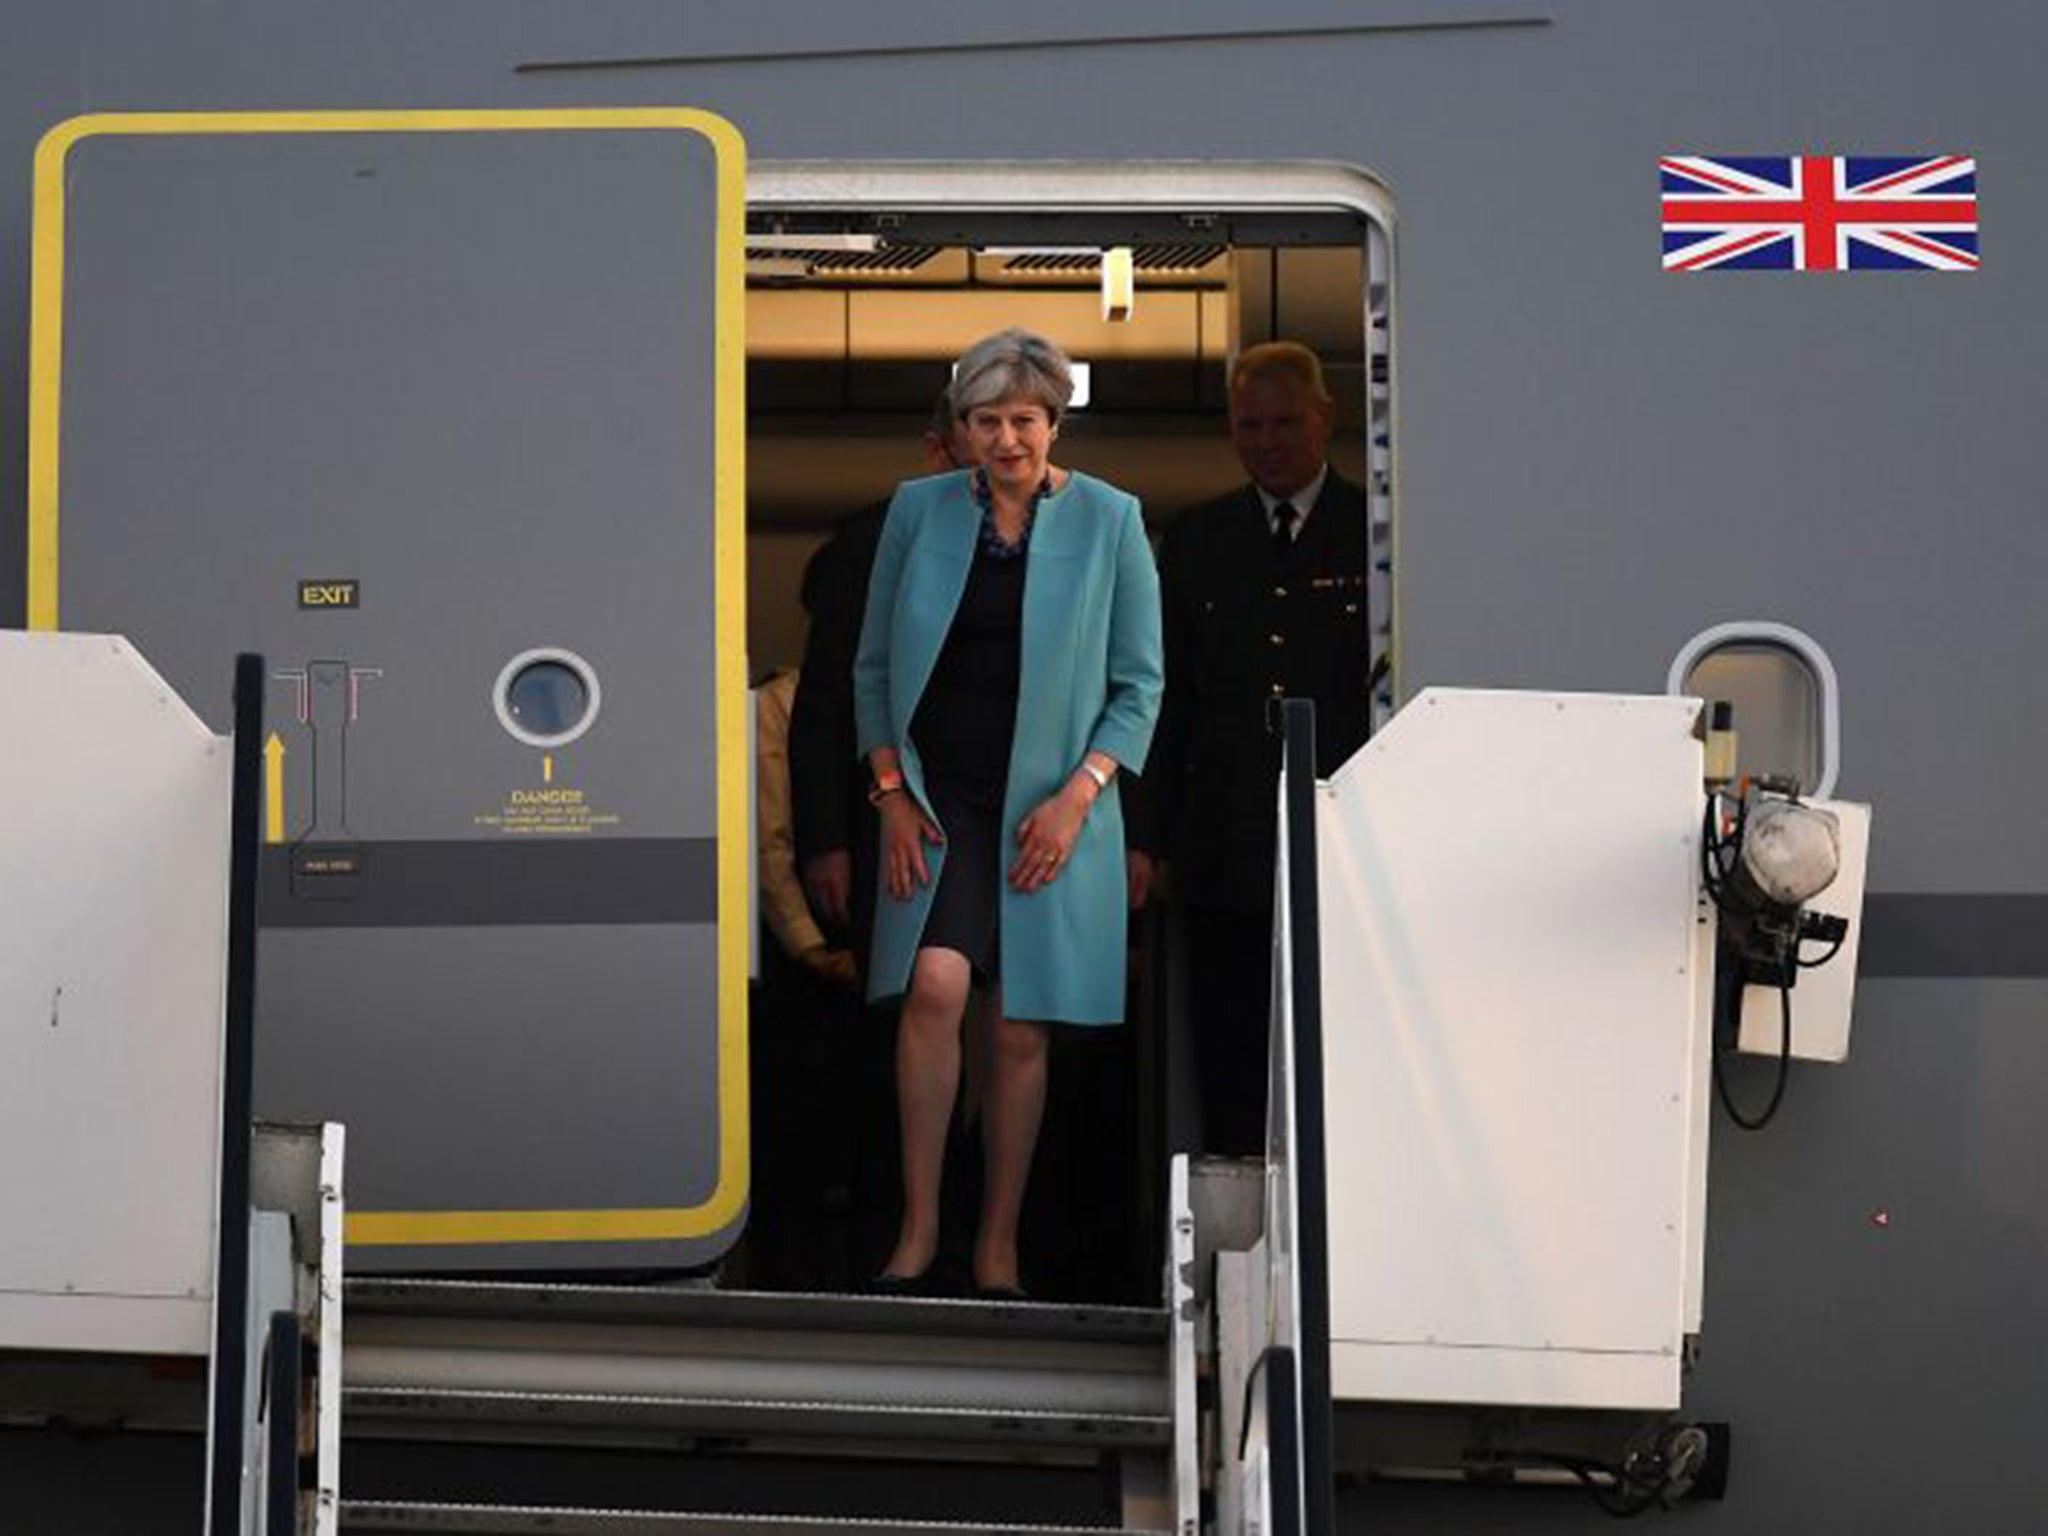 Theresa May arriving at the G20 conference in Hamburg on Thursday evening